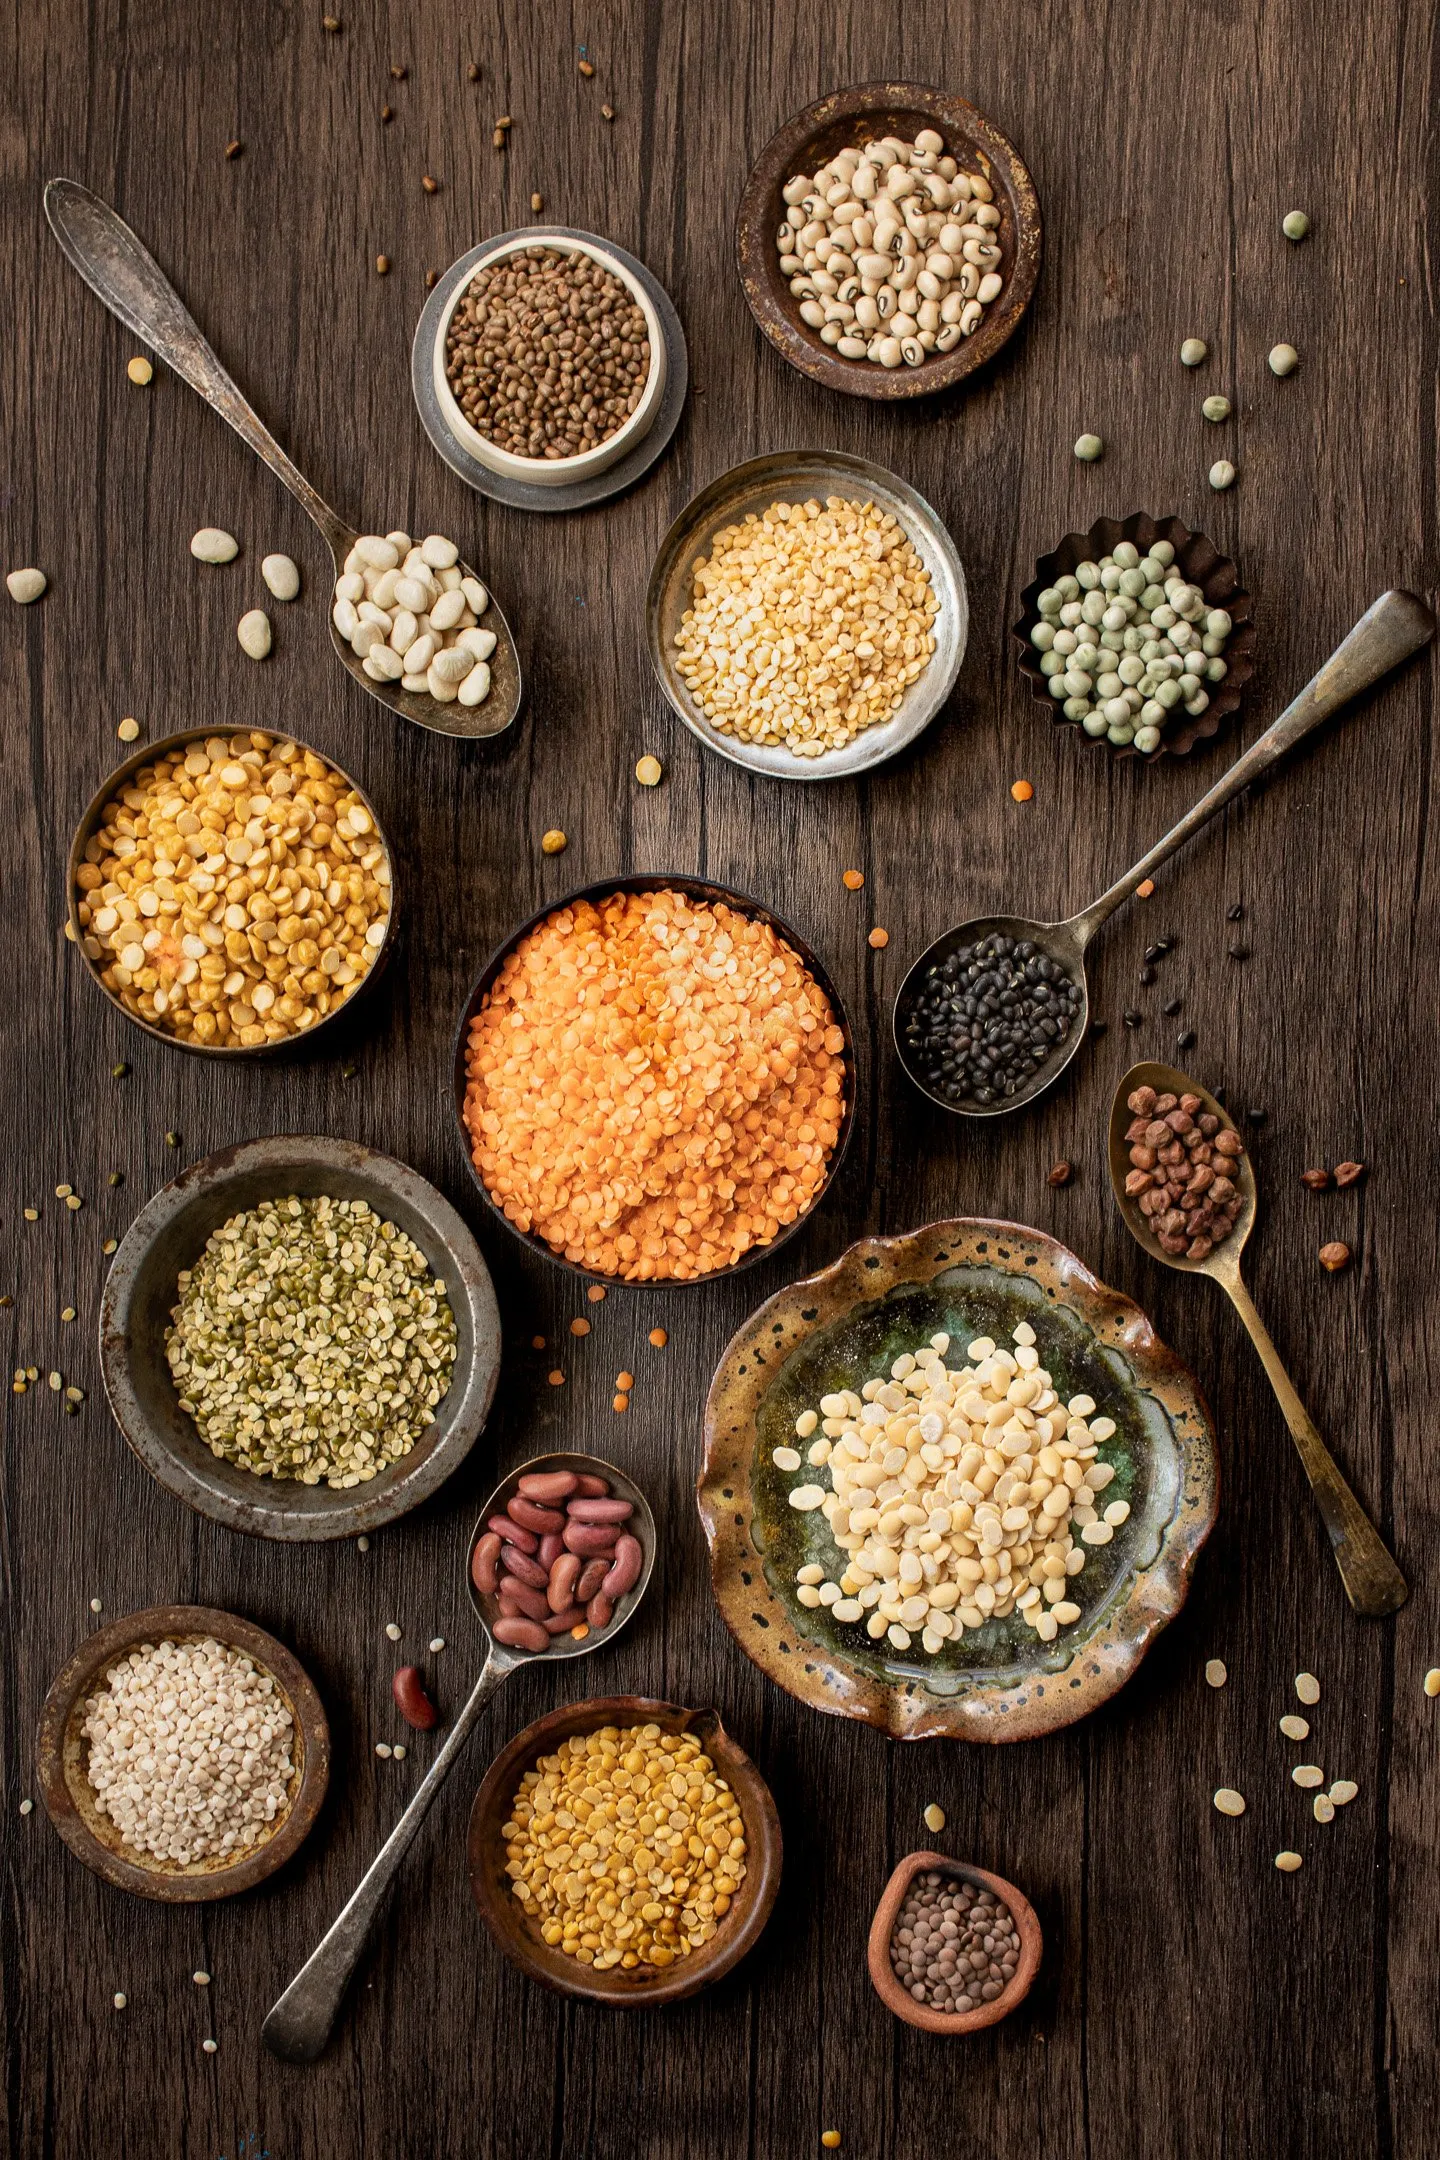 Dal, lentils, beans and pulses commonly used in Indian cooking